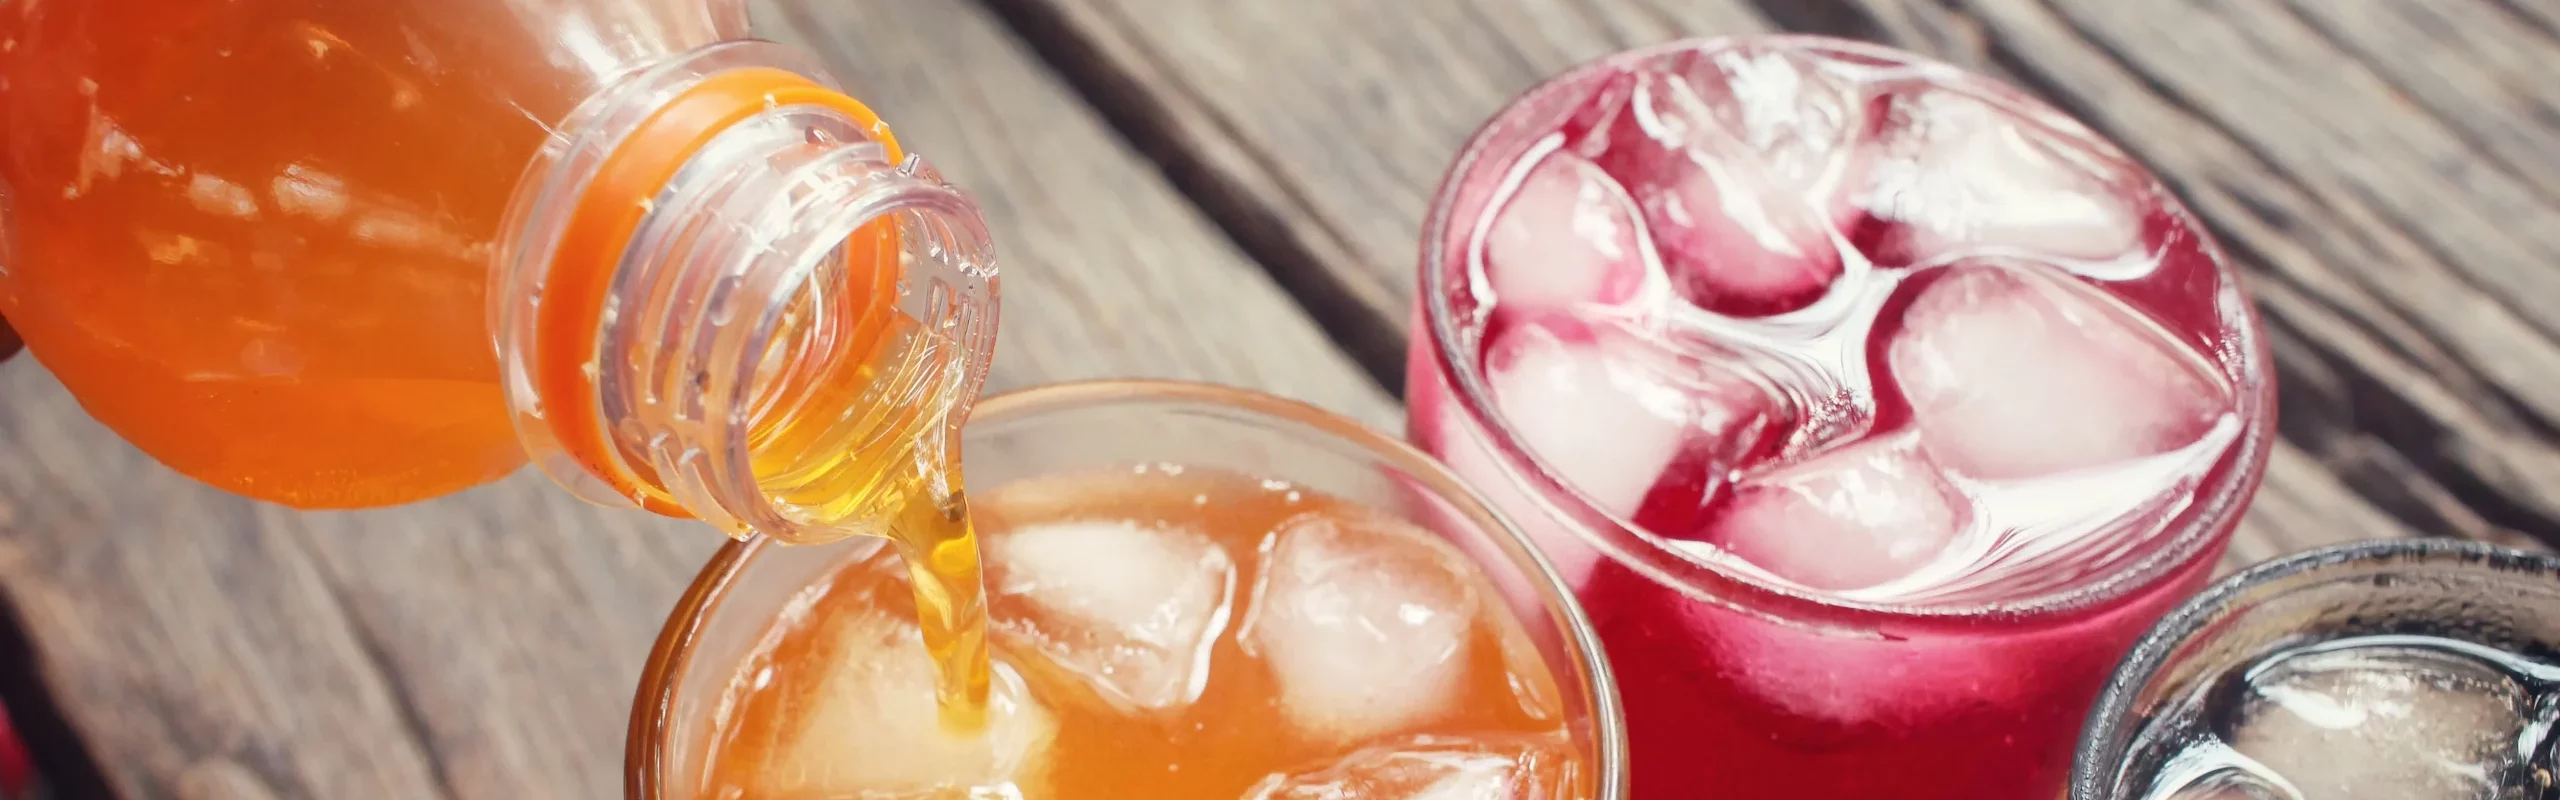 Are Soft Drinks Healthy Hydration?